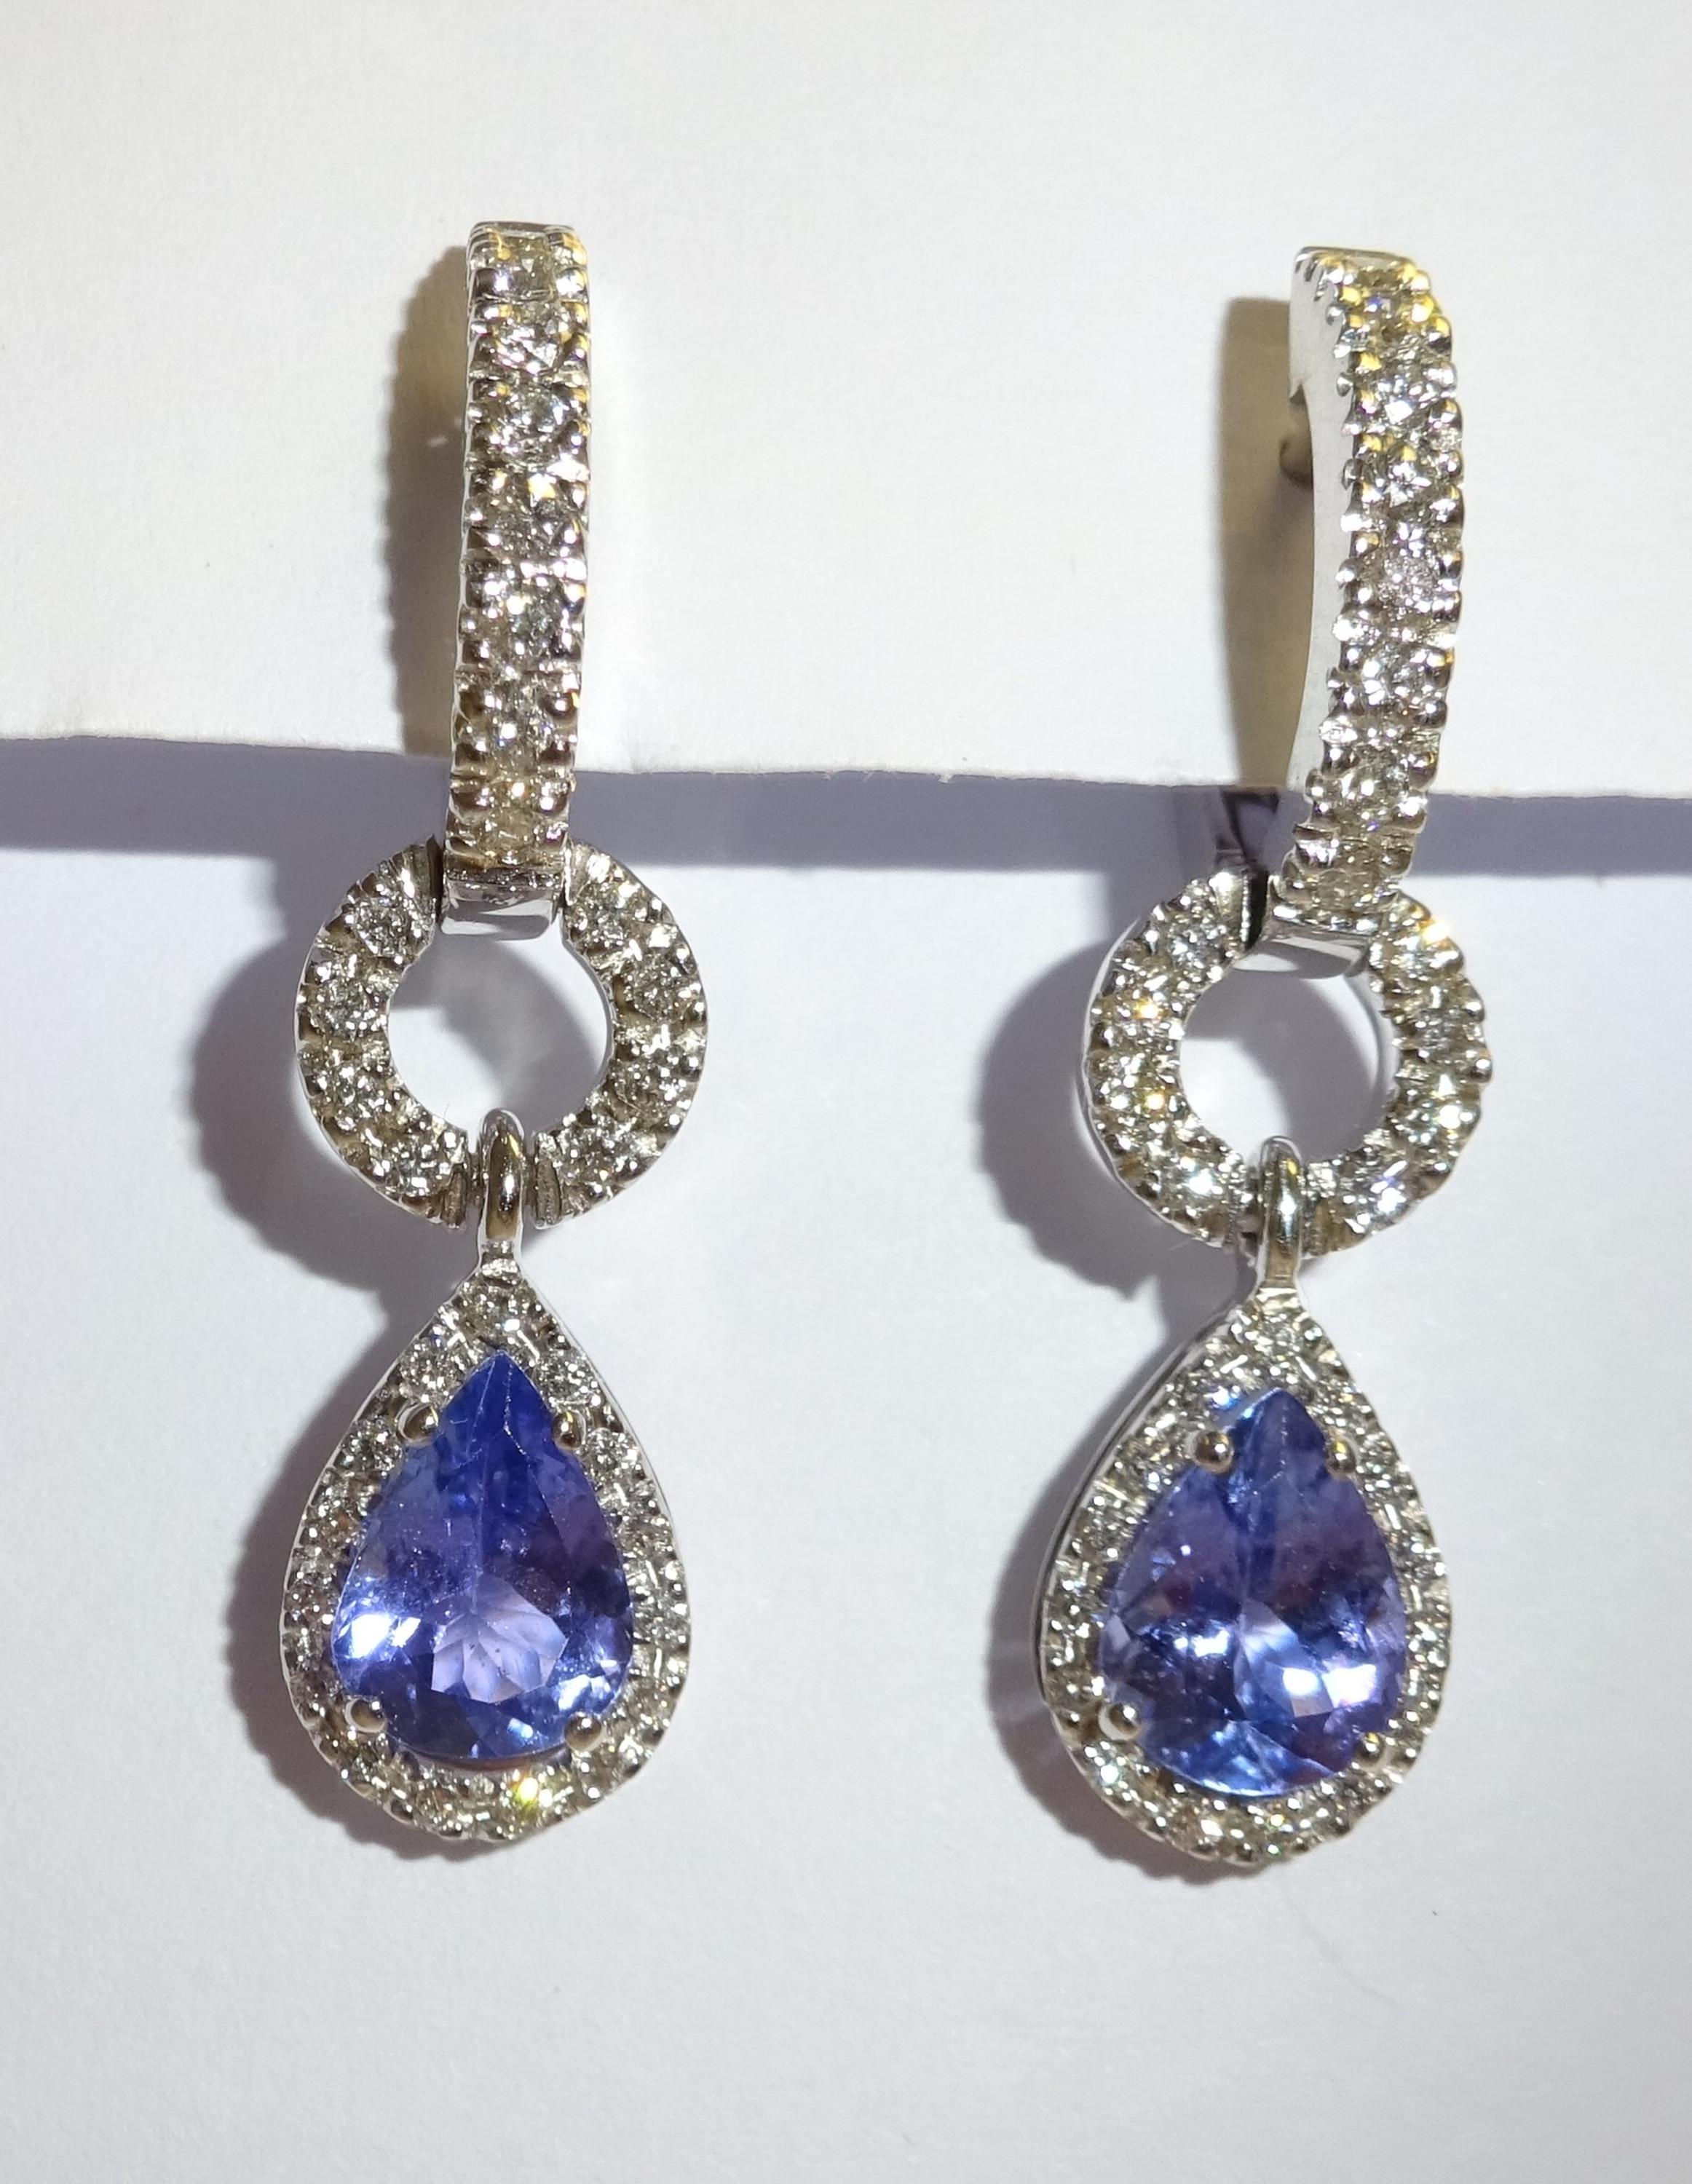 18 Karat White Gold Diamond and Tanzanite Dangle Earrings

62 Diamonds 0.60  Carat H SI
2 Tanzanite 2.03  Carat


Founded in 1974, Gianni Lazzaro is a family-owned jewelry company based out of Düsseldorf, Germany.
Although rooted in Germany, Gianni